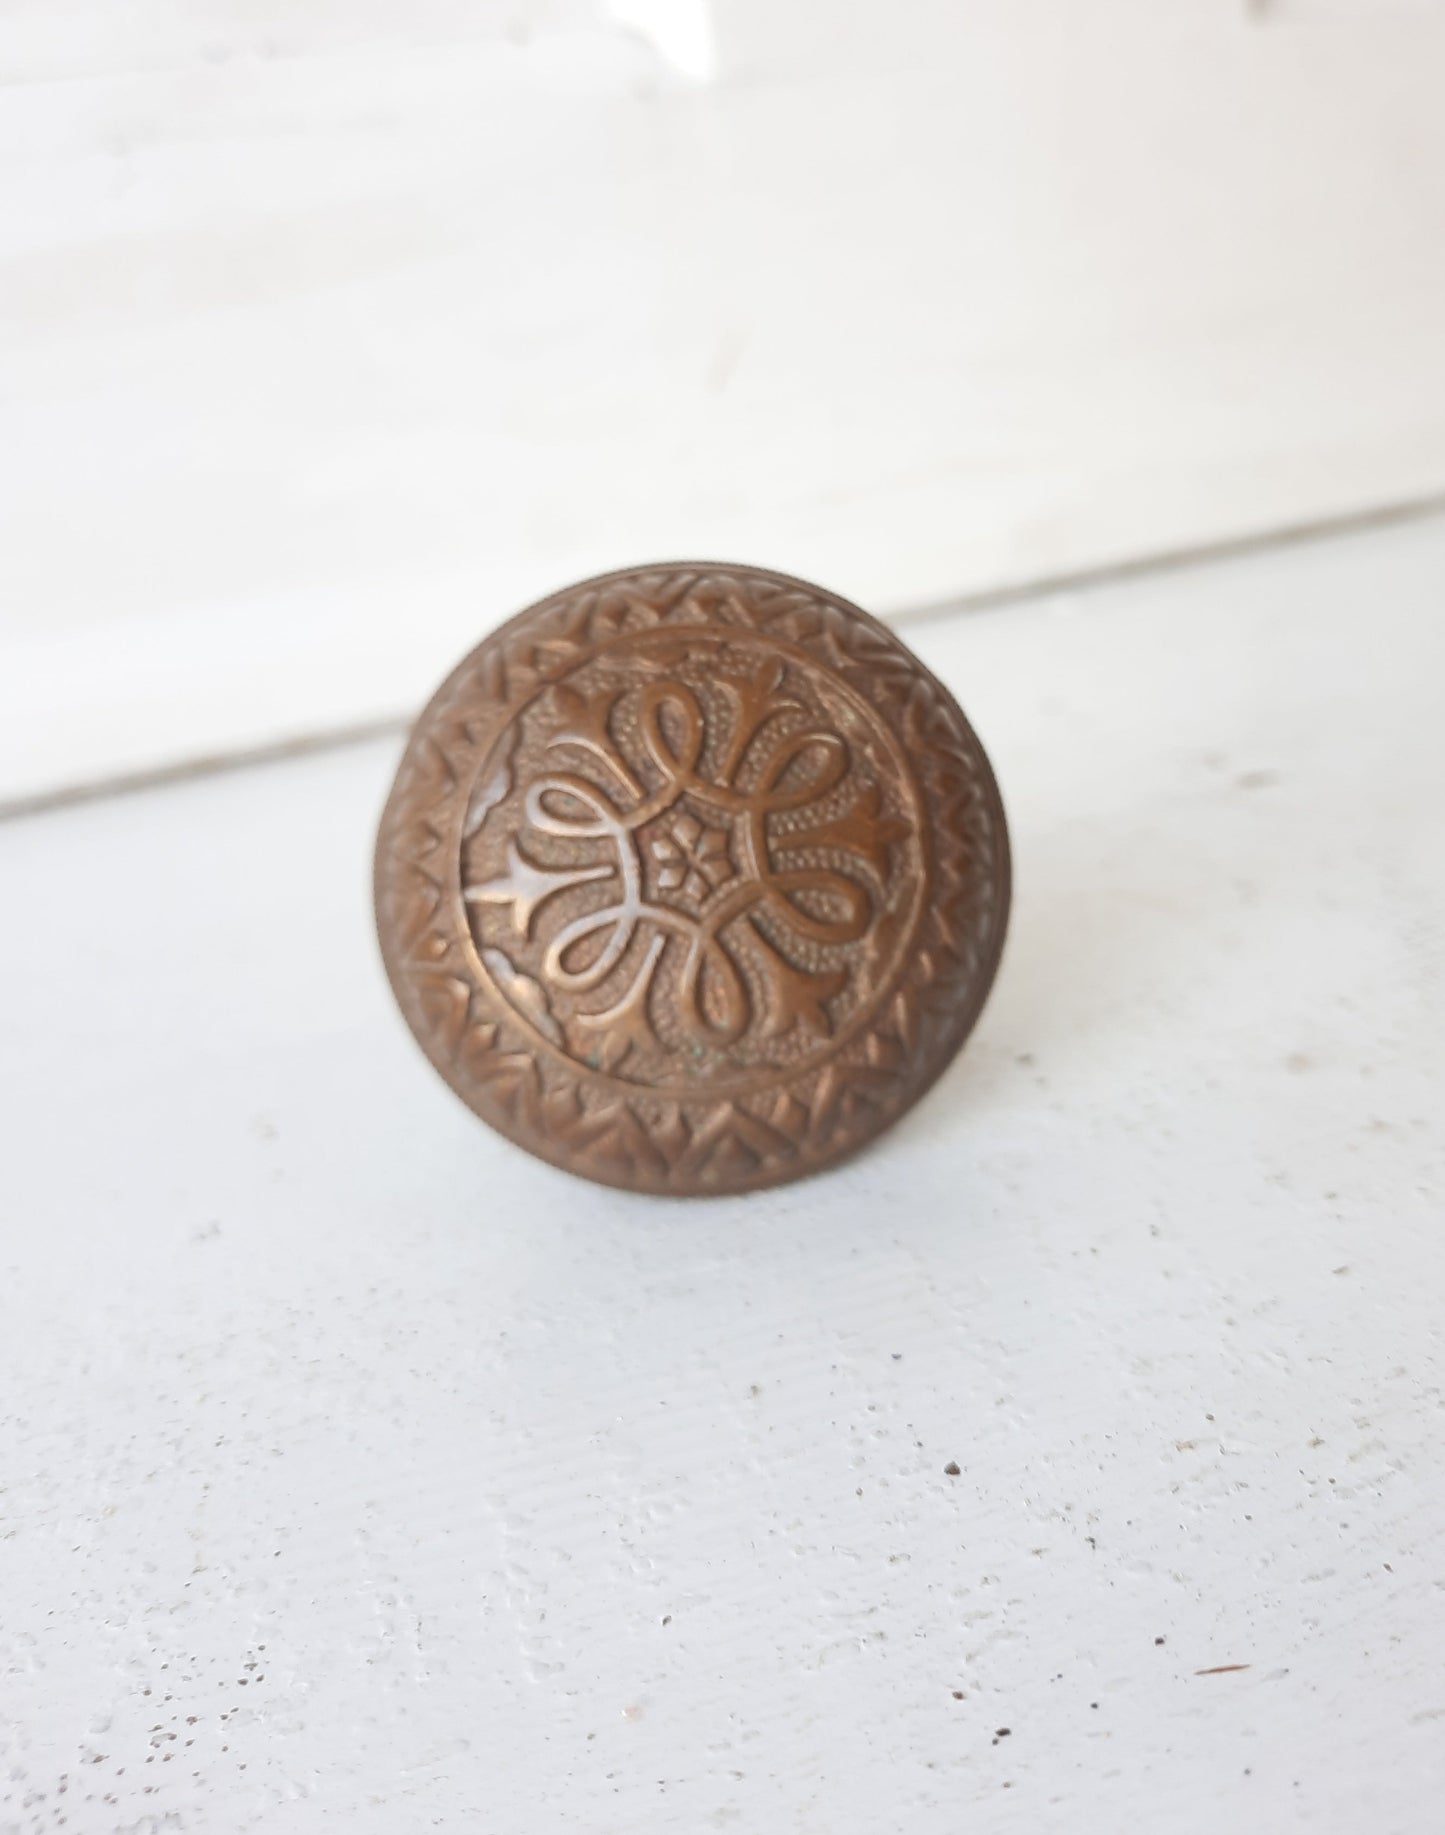 1873 Small Yale Doorknob with Ornate Pattern, Antique Bronze Door Knob from Victorian Era 090901